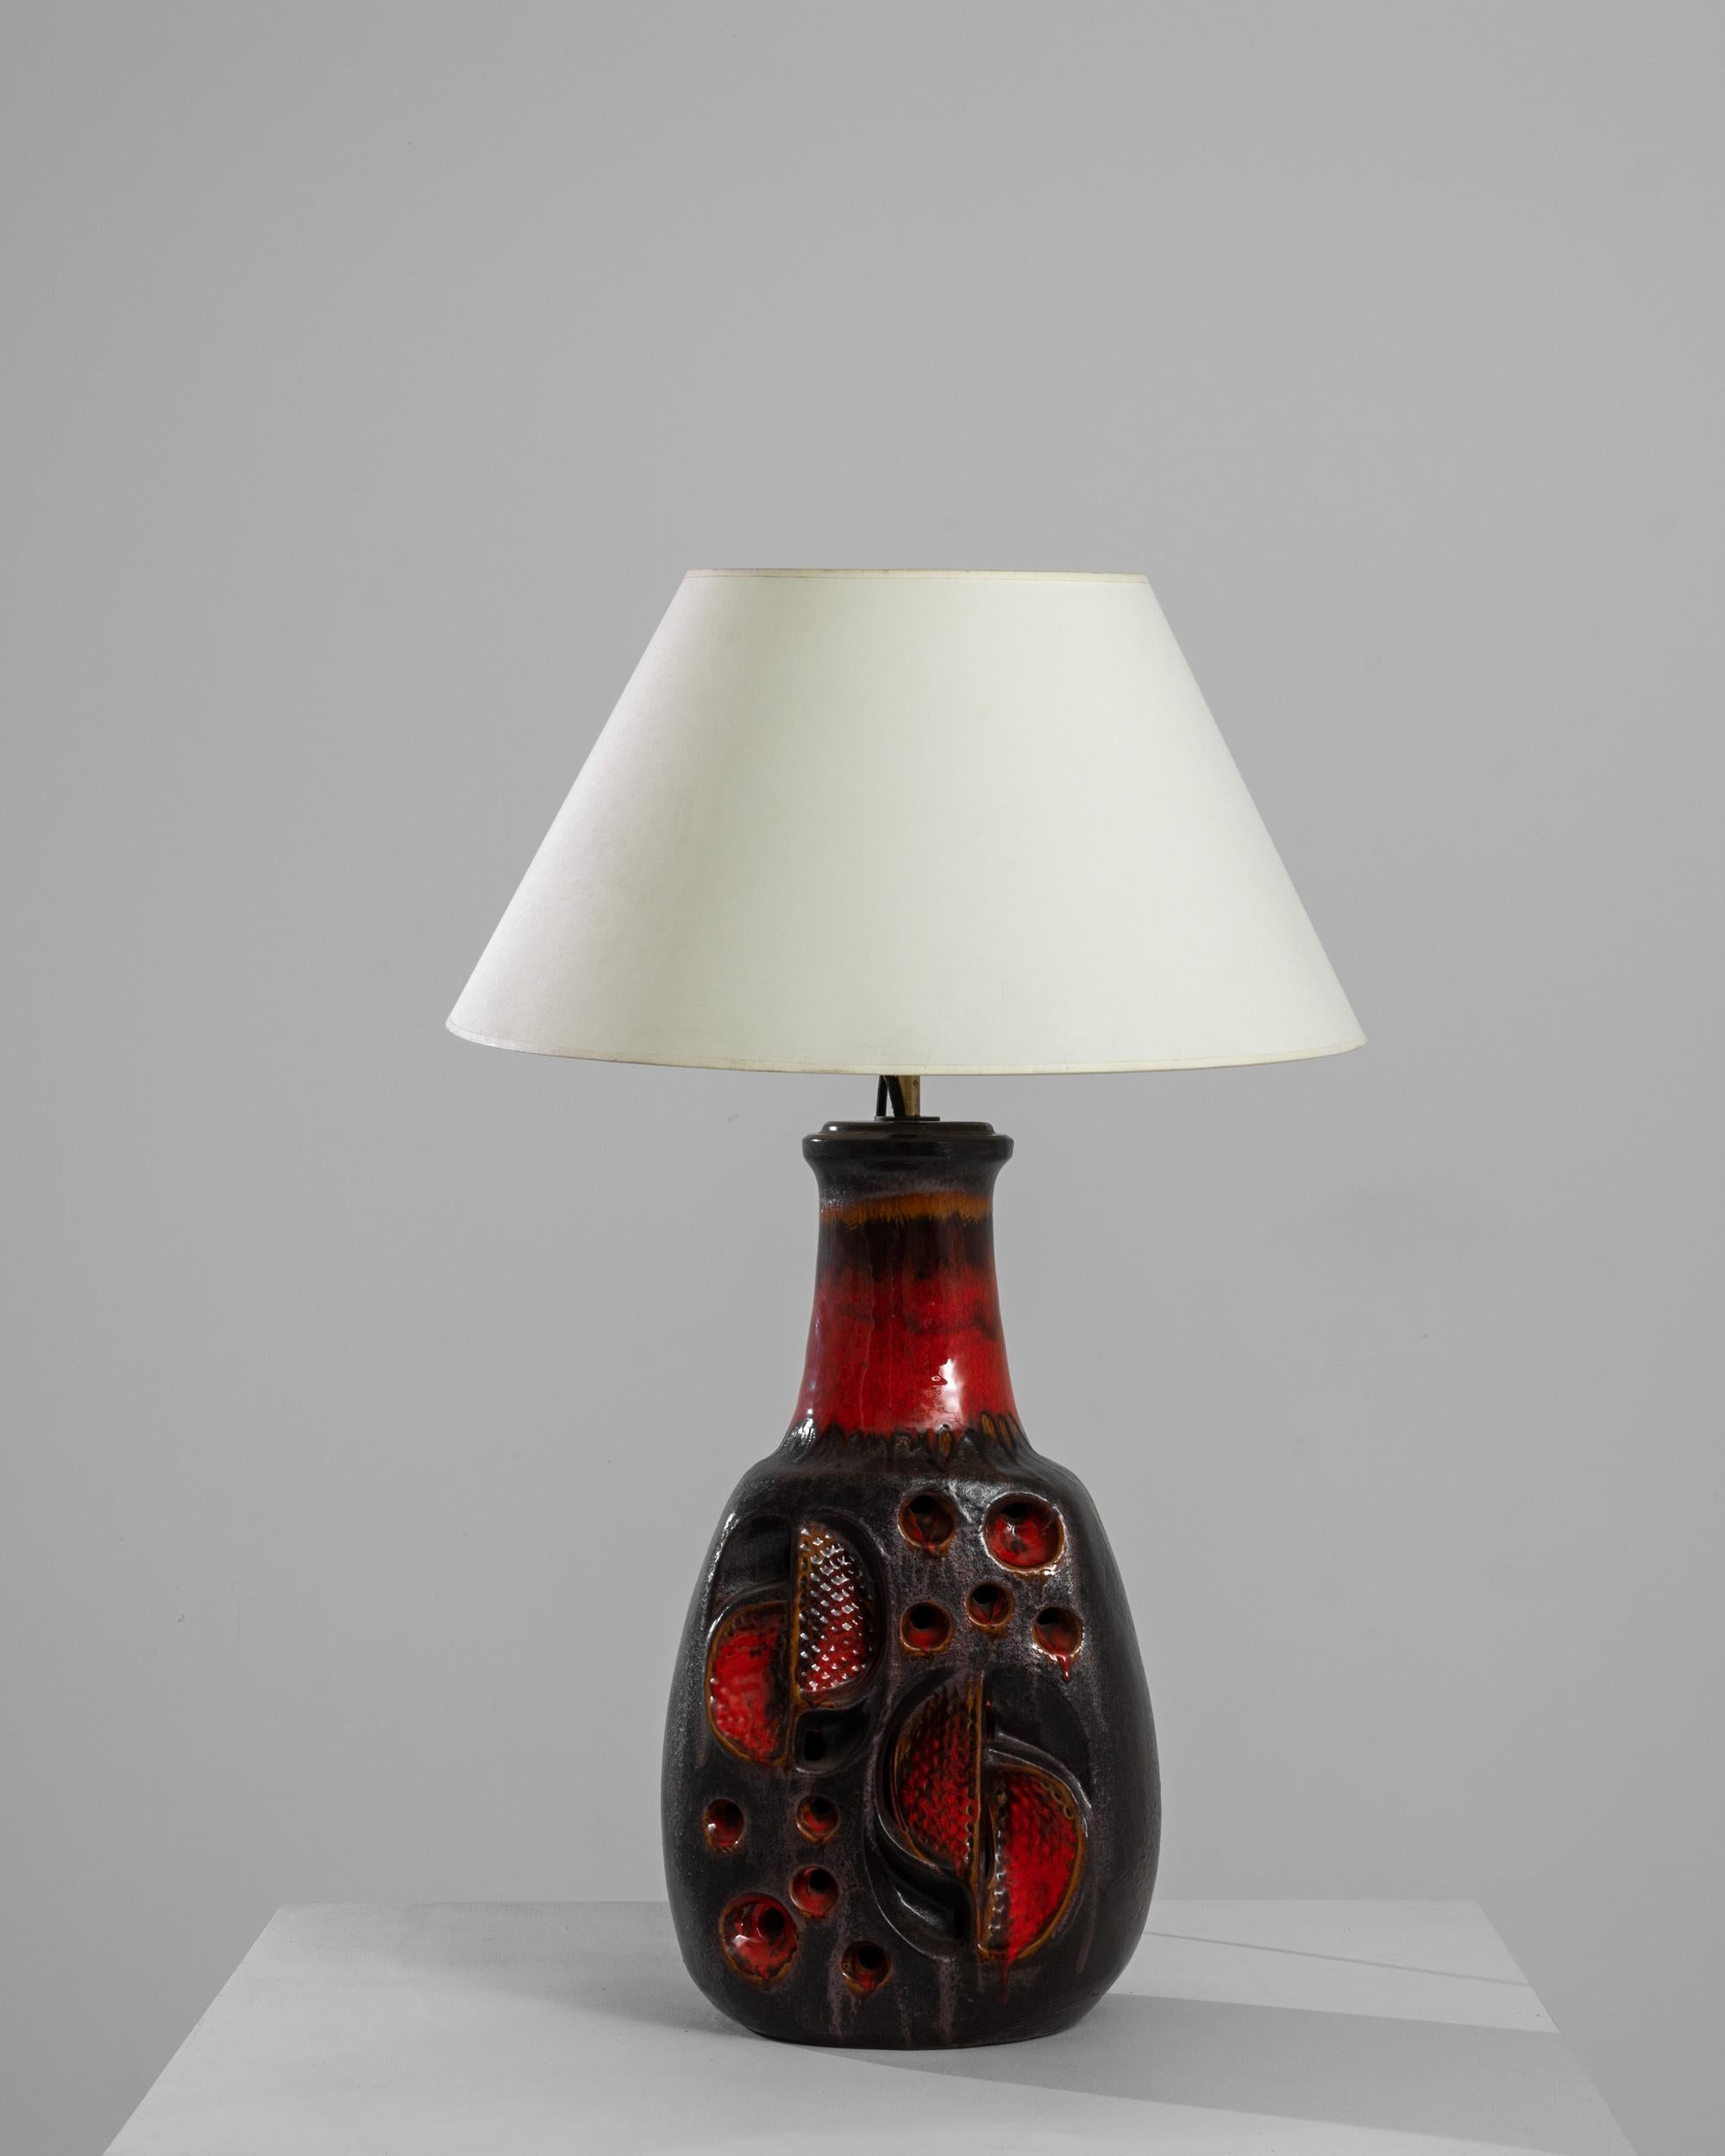 A ceramic table lamp from Germany, produced circa 1960. A beautiful example of Mid-Century German lava glaze ceramic, this tall table lamp, with its bright red tone flowing into brown black, glows like an ember. Deep half-spheres and semi-circles